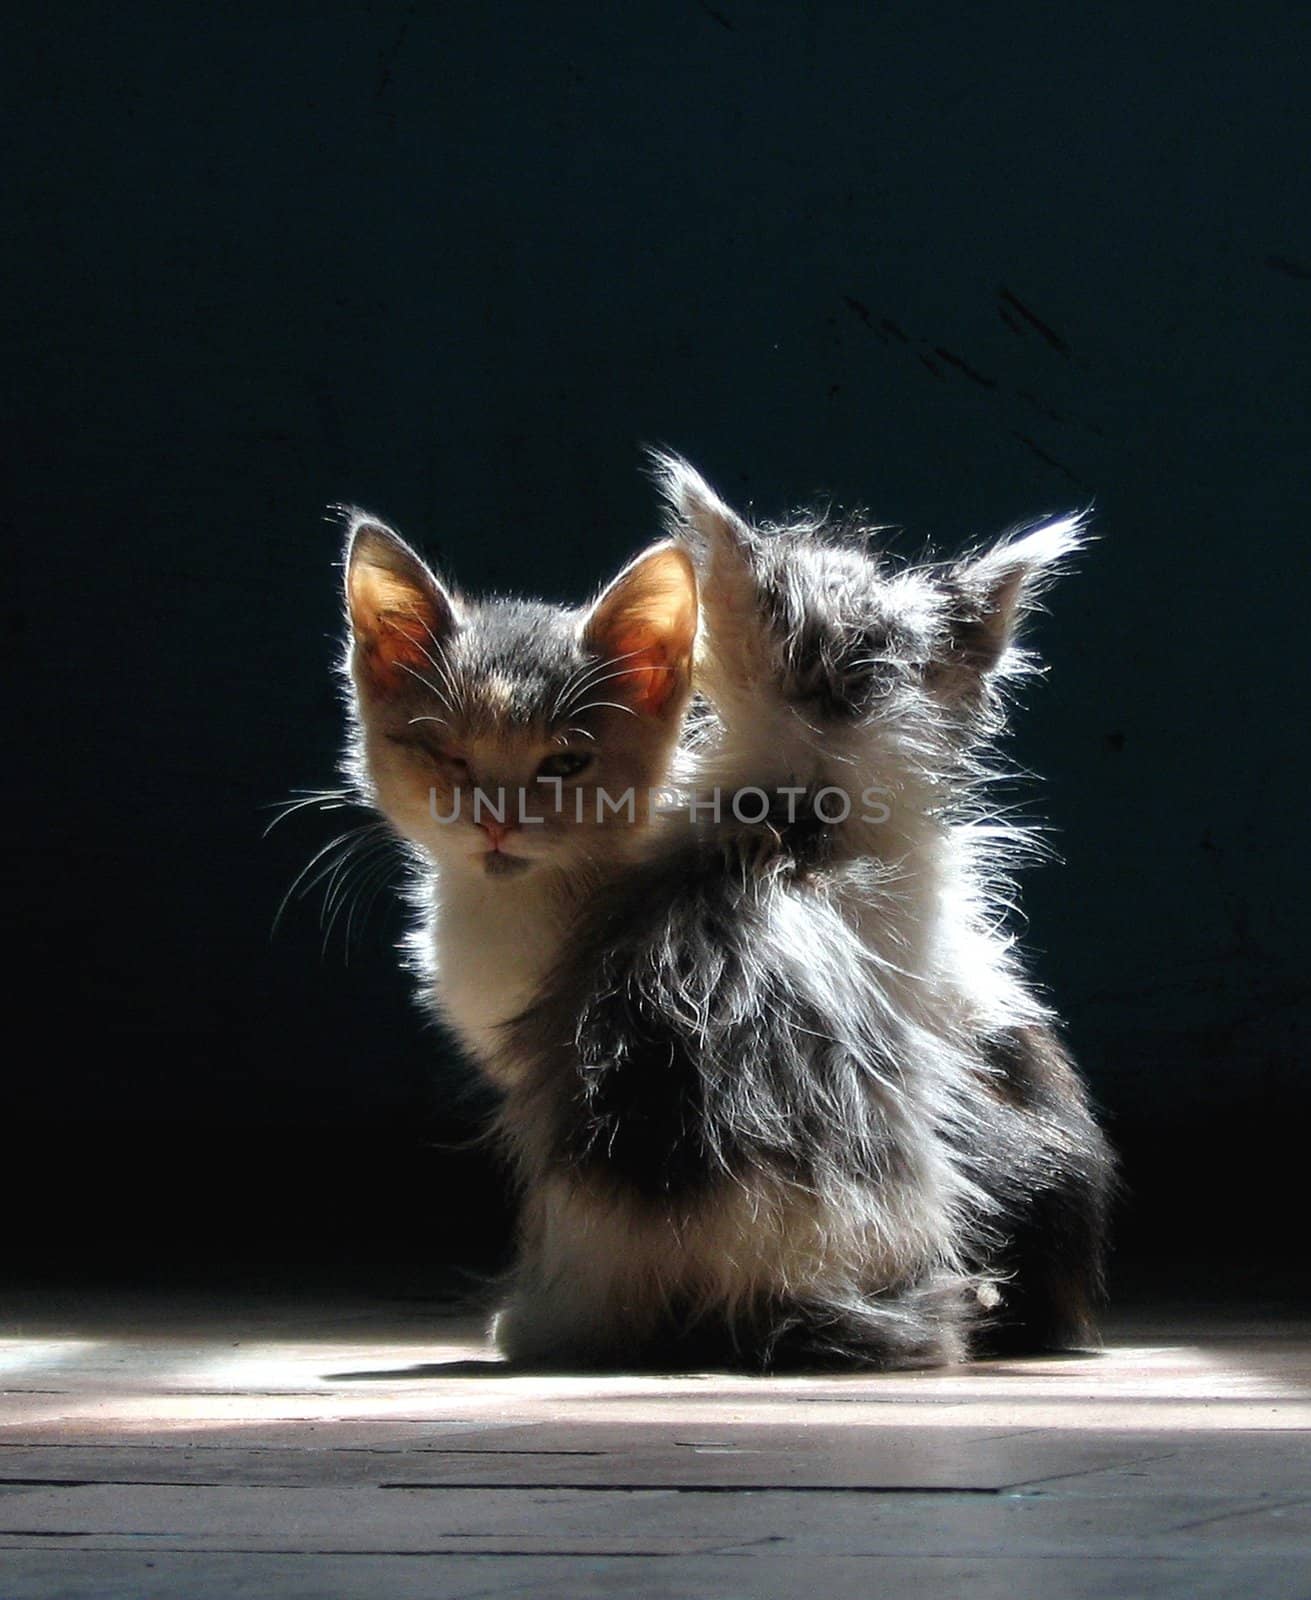 Two small kittens are heated in rays of light. Black background.